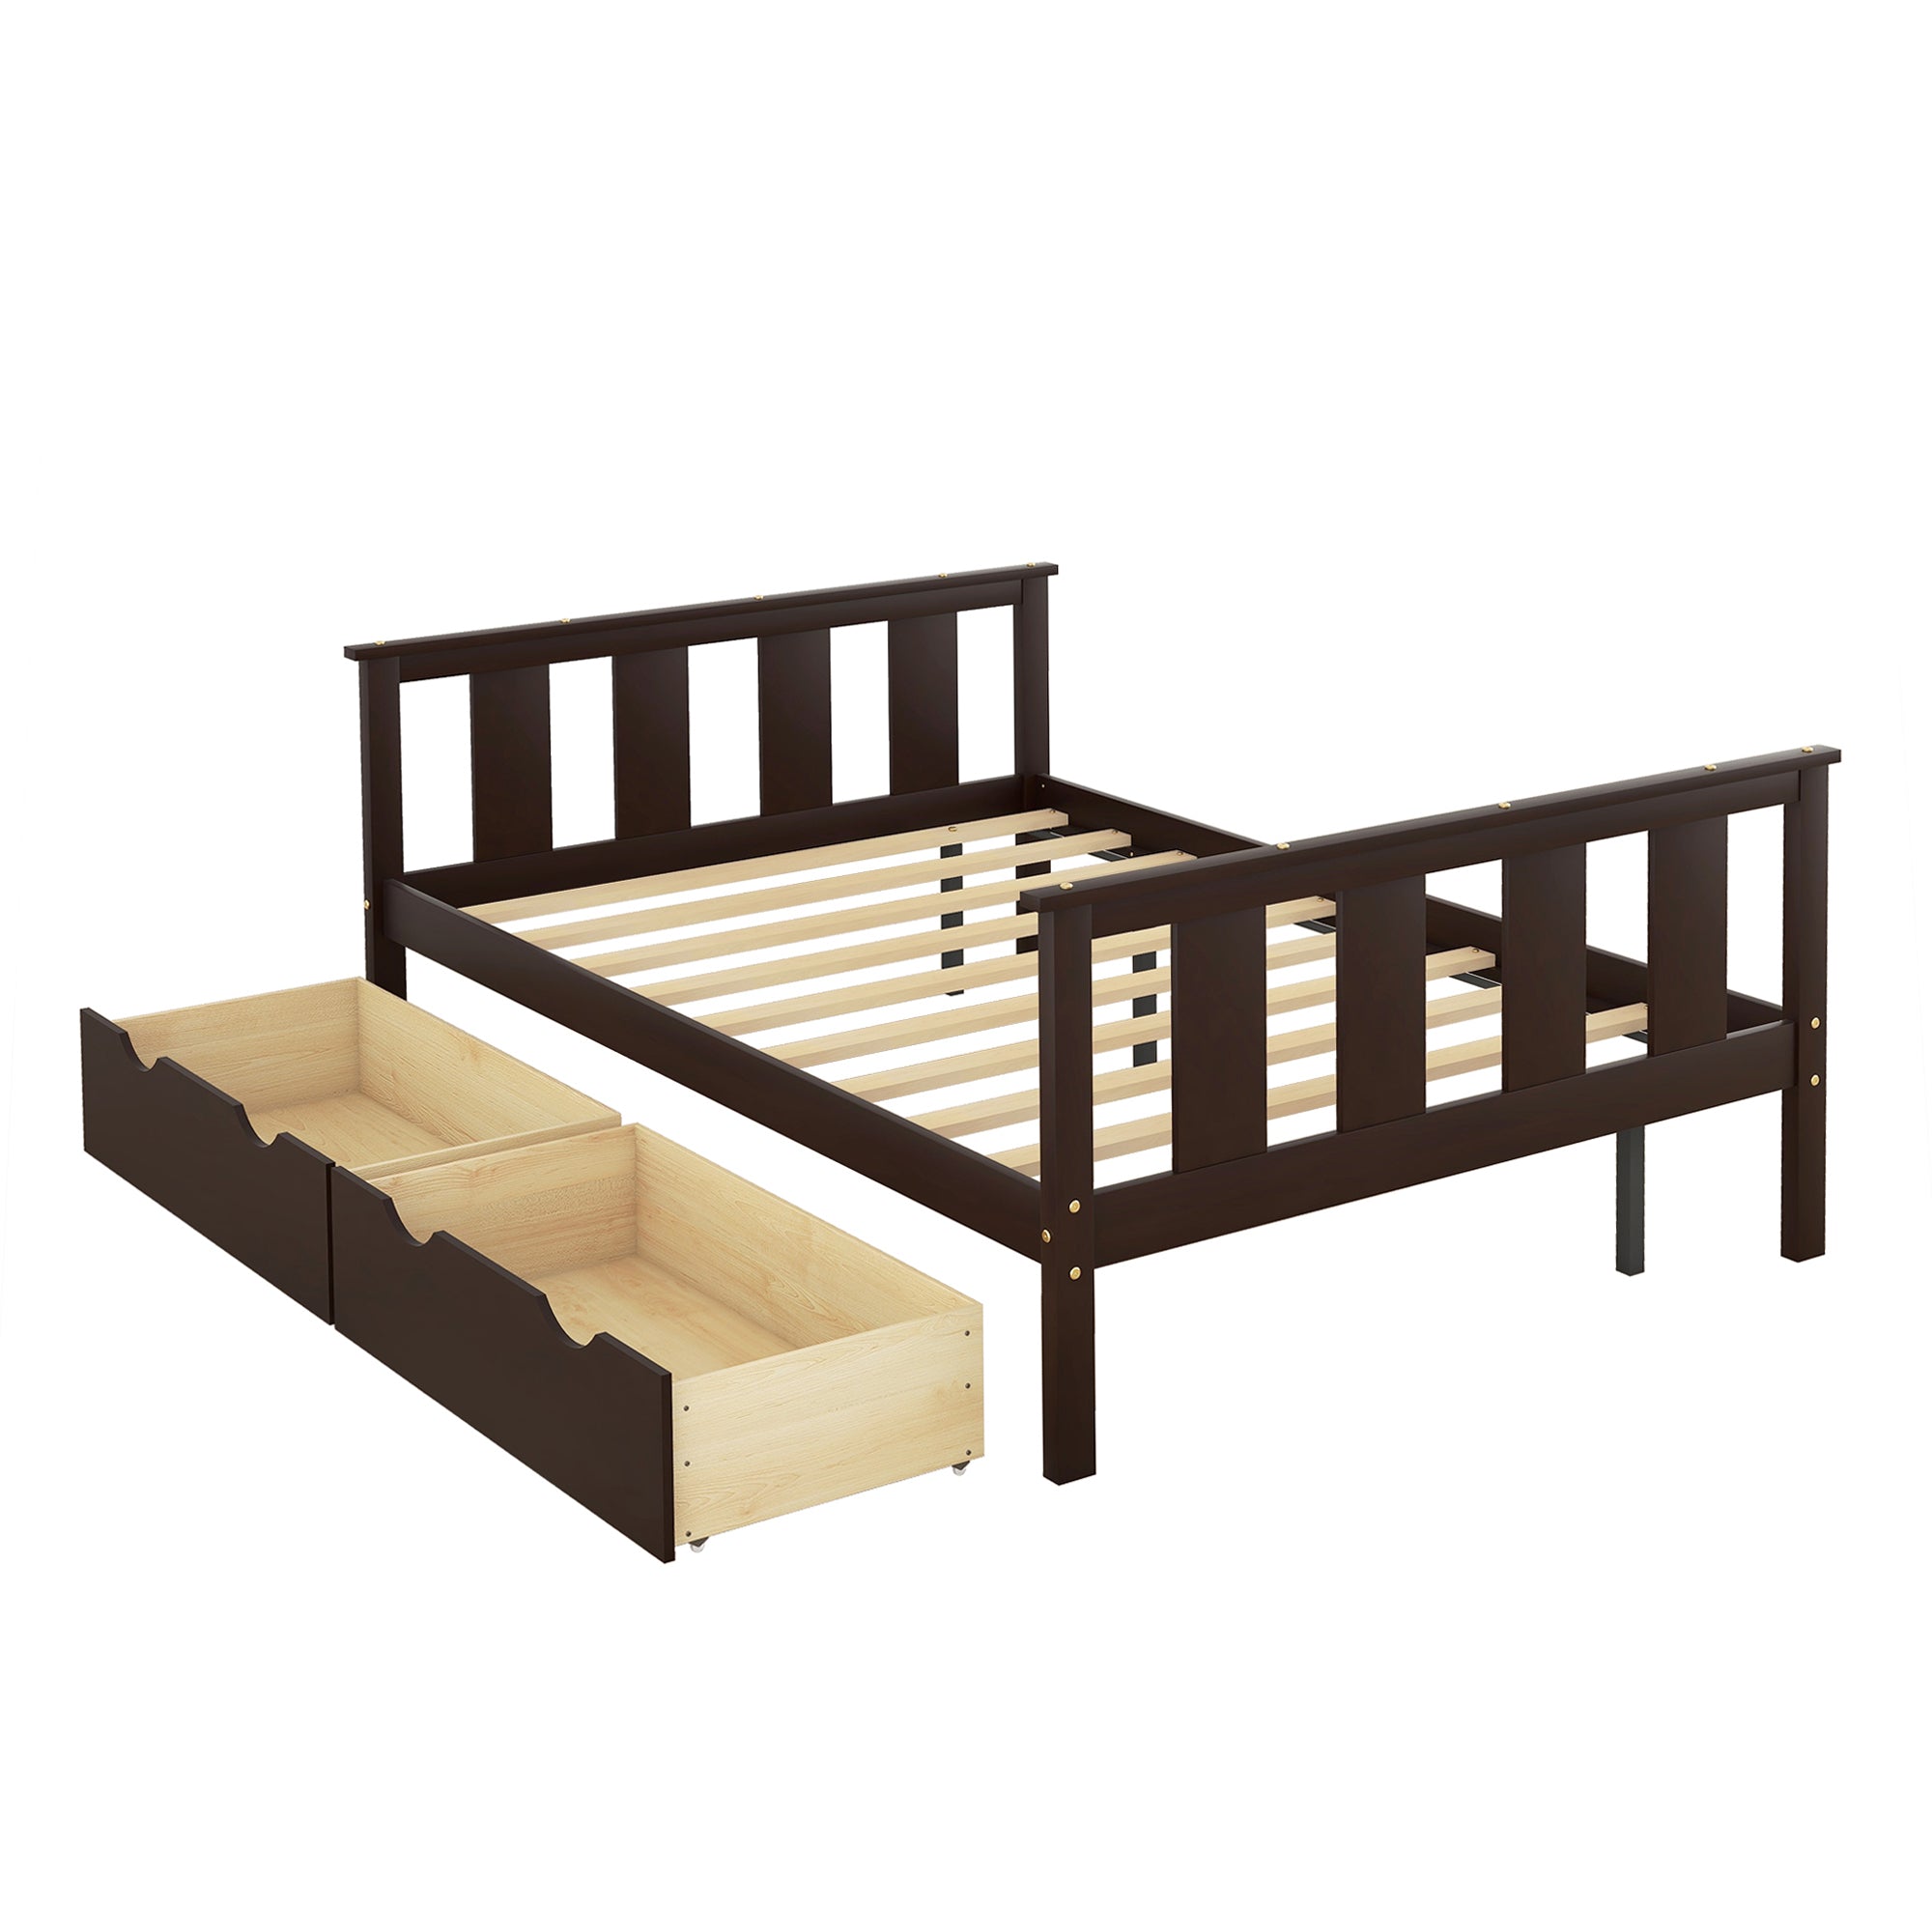 ZNTS Full Size Platform Bed Wood Bed Frame with Storage Drawers, Espresso W158068086